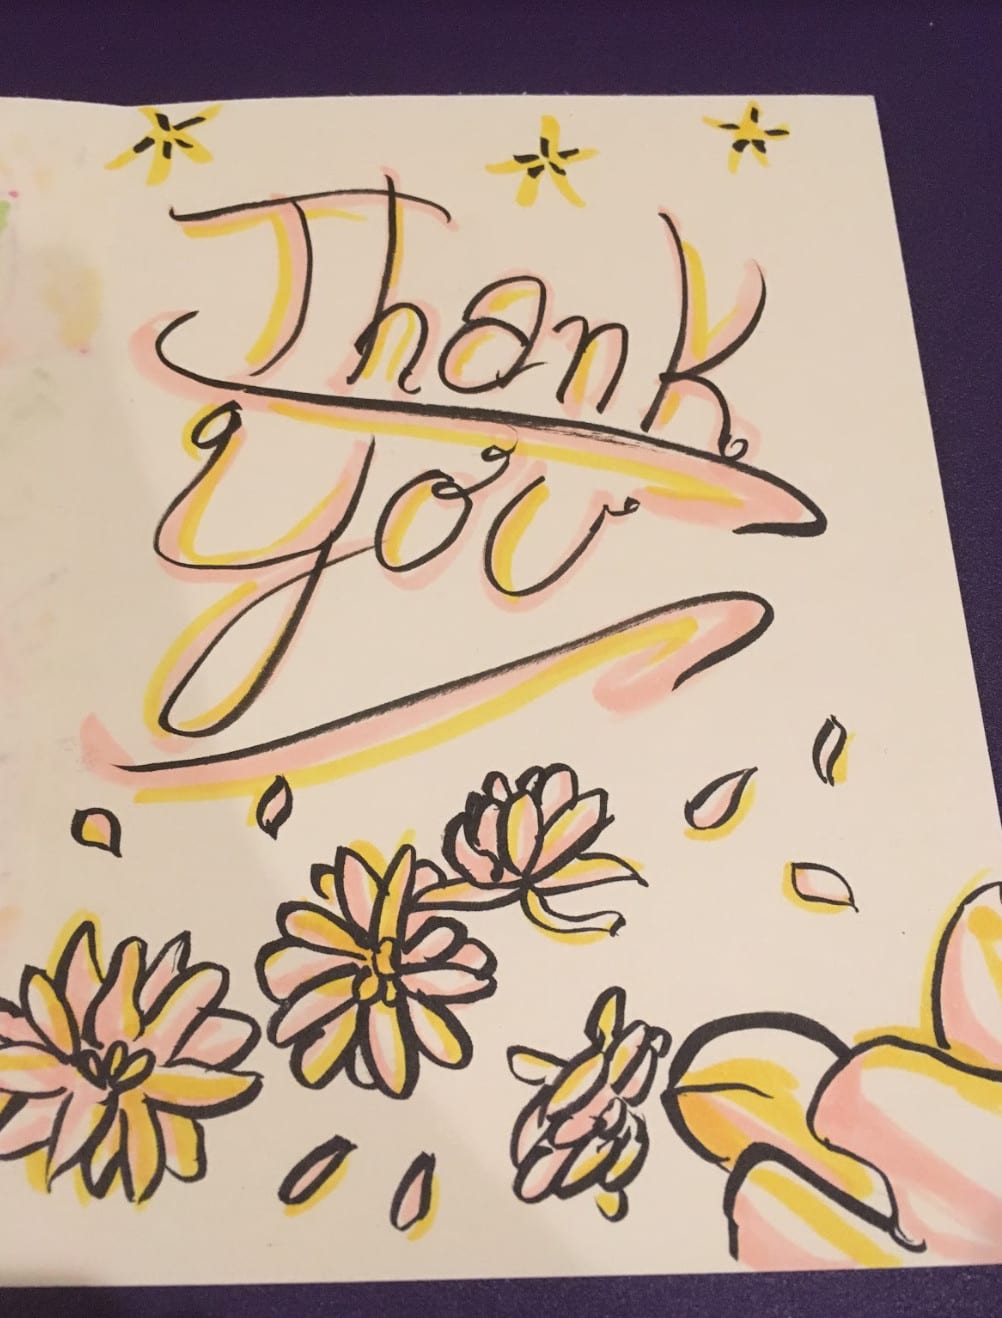 Thank you art sketch greeting design template | PosterMyWall